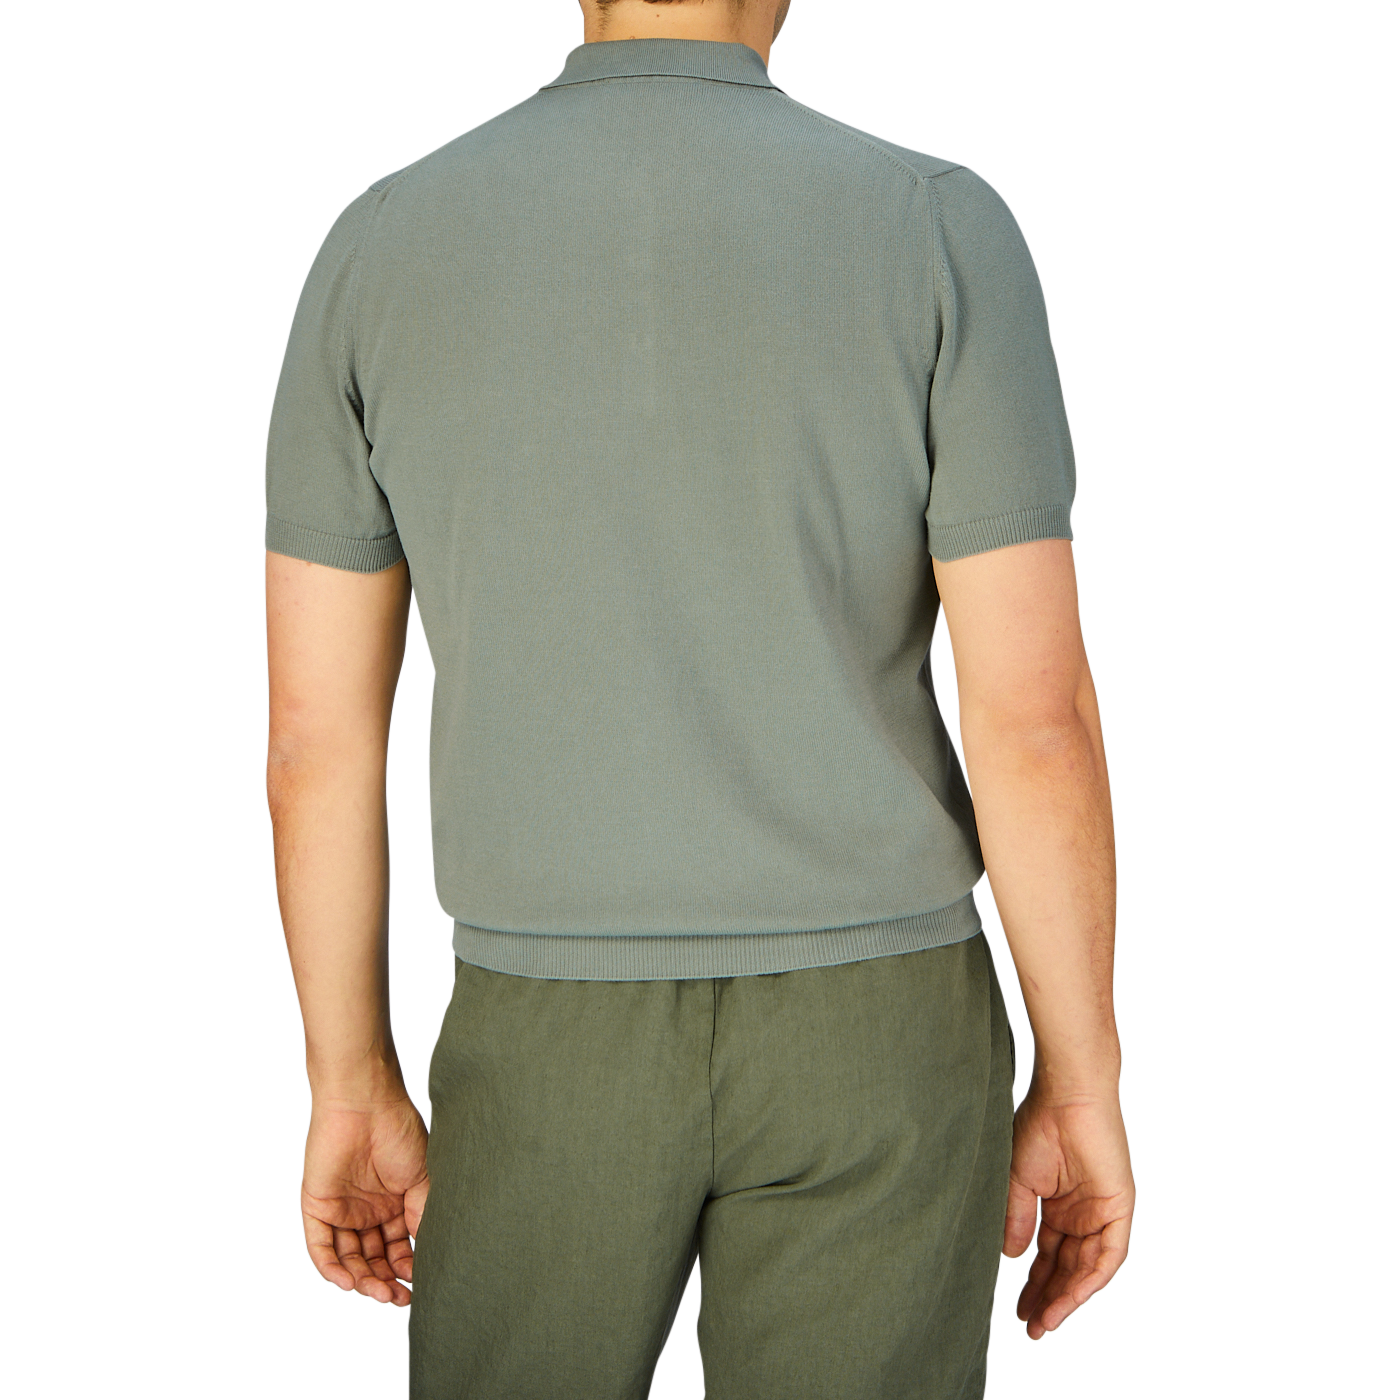 Man standing facing away from the camera, wearing a slim fit, Khaki Green Supima Cotton Polo Shirt designed by Mauro Ottaviani and matching pants.